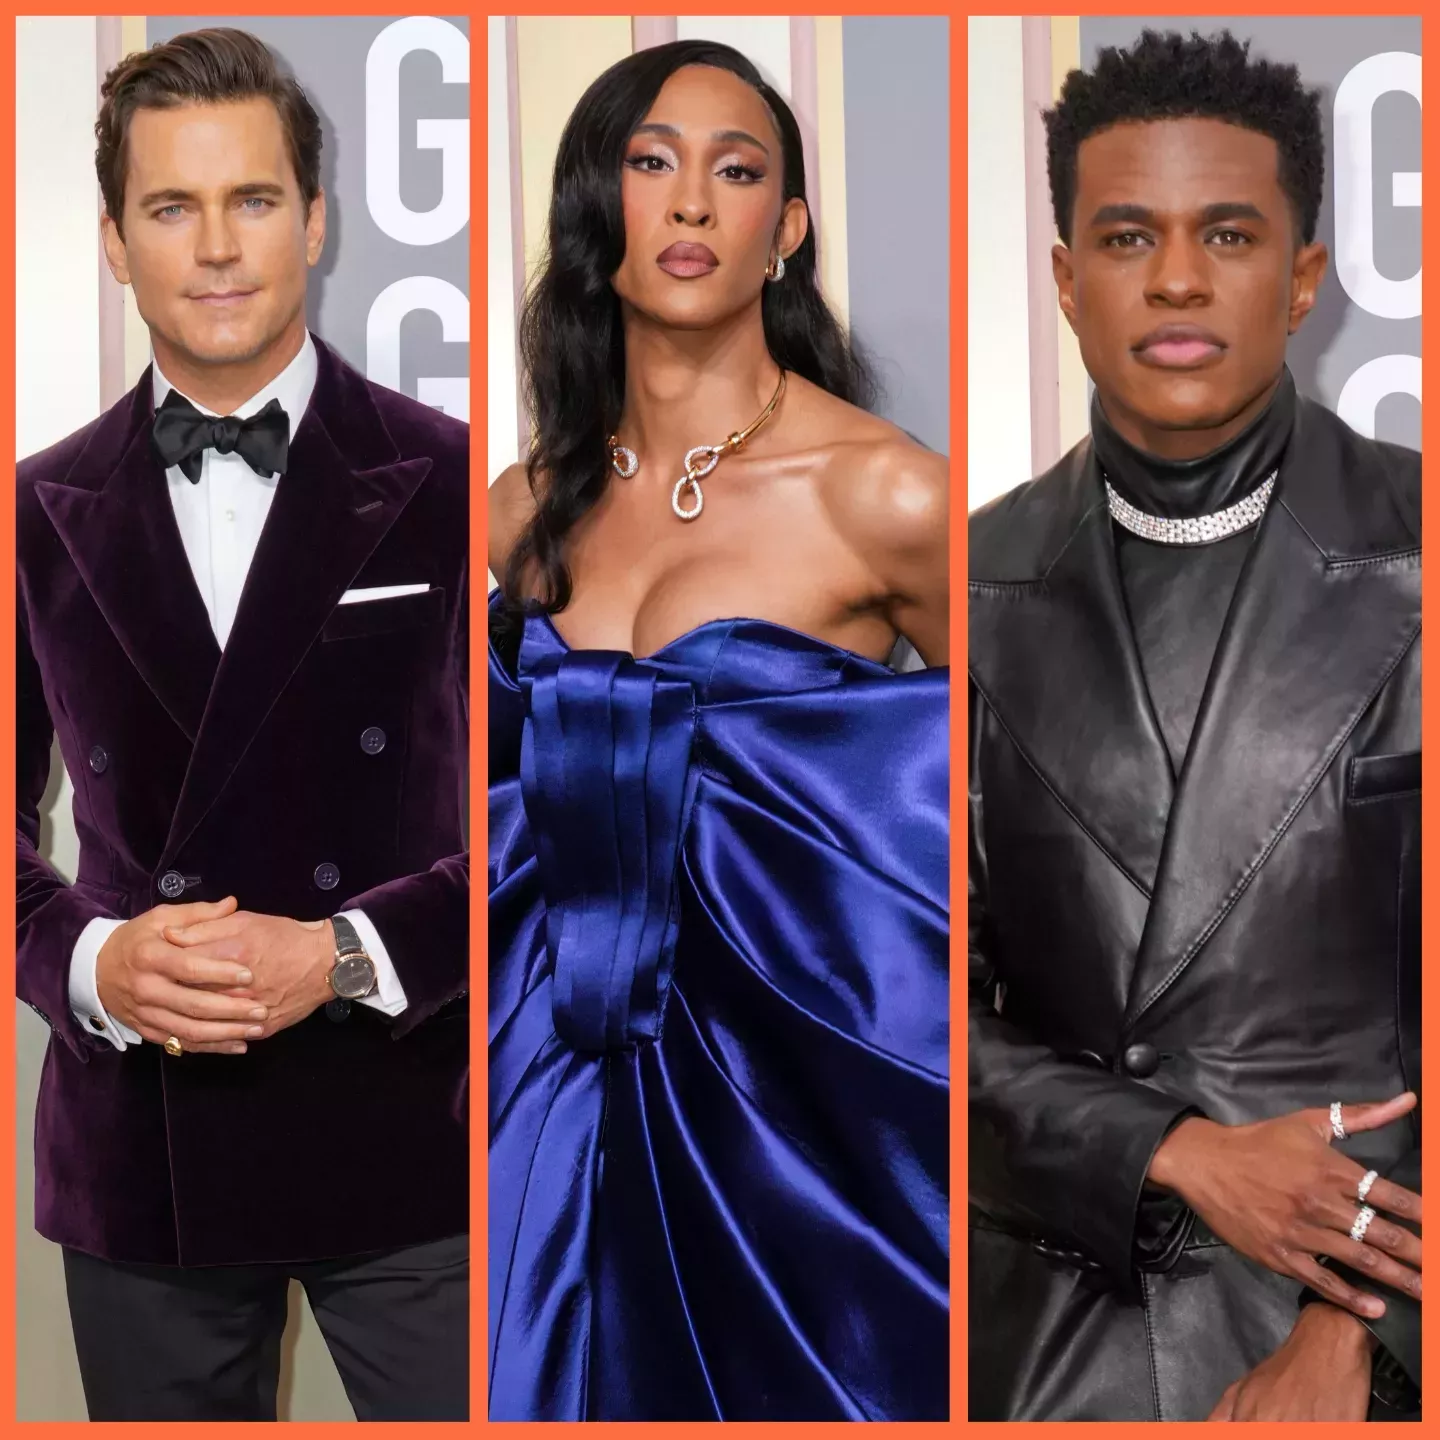 Matt Bomer, MJ Rodriguez and Jeremy Pope at the 2023 Golden Globes